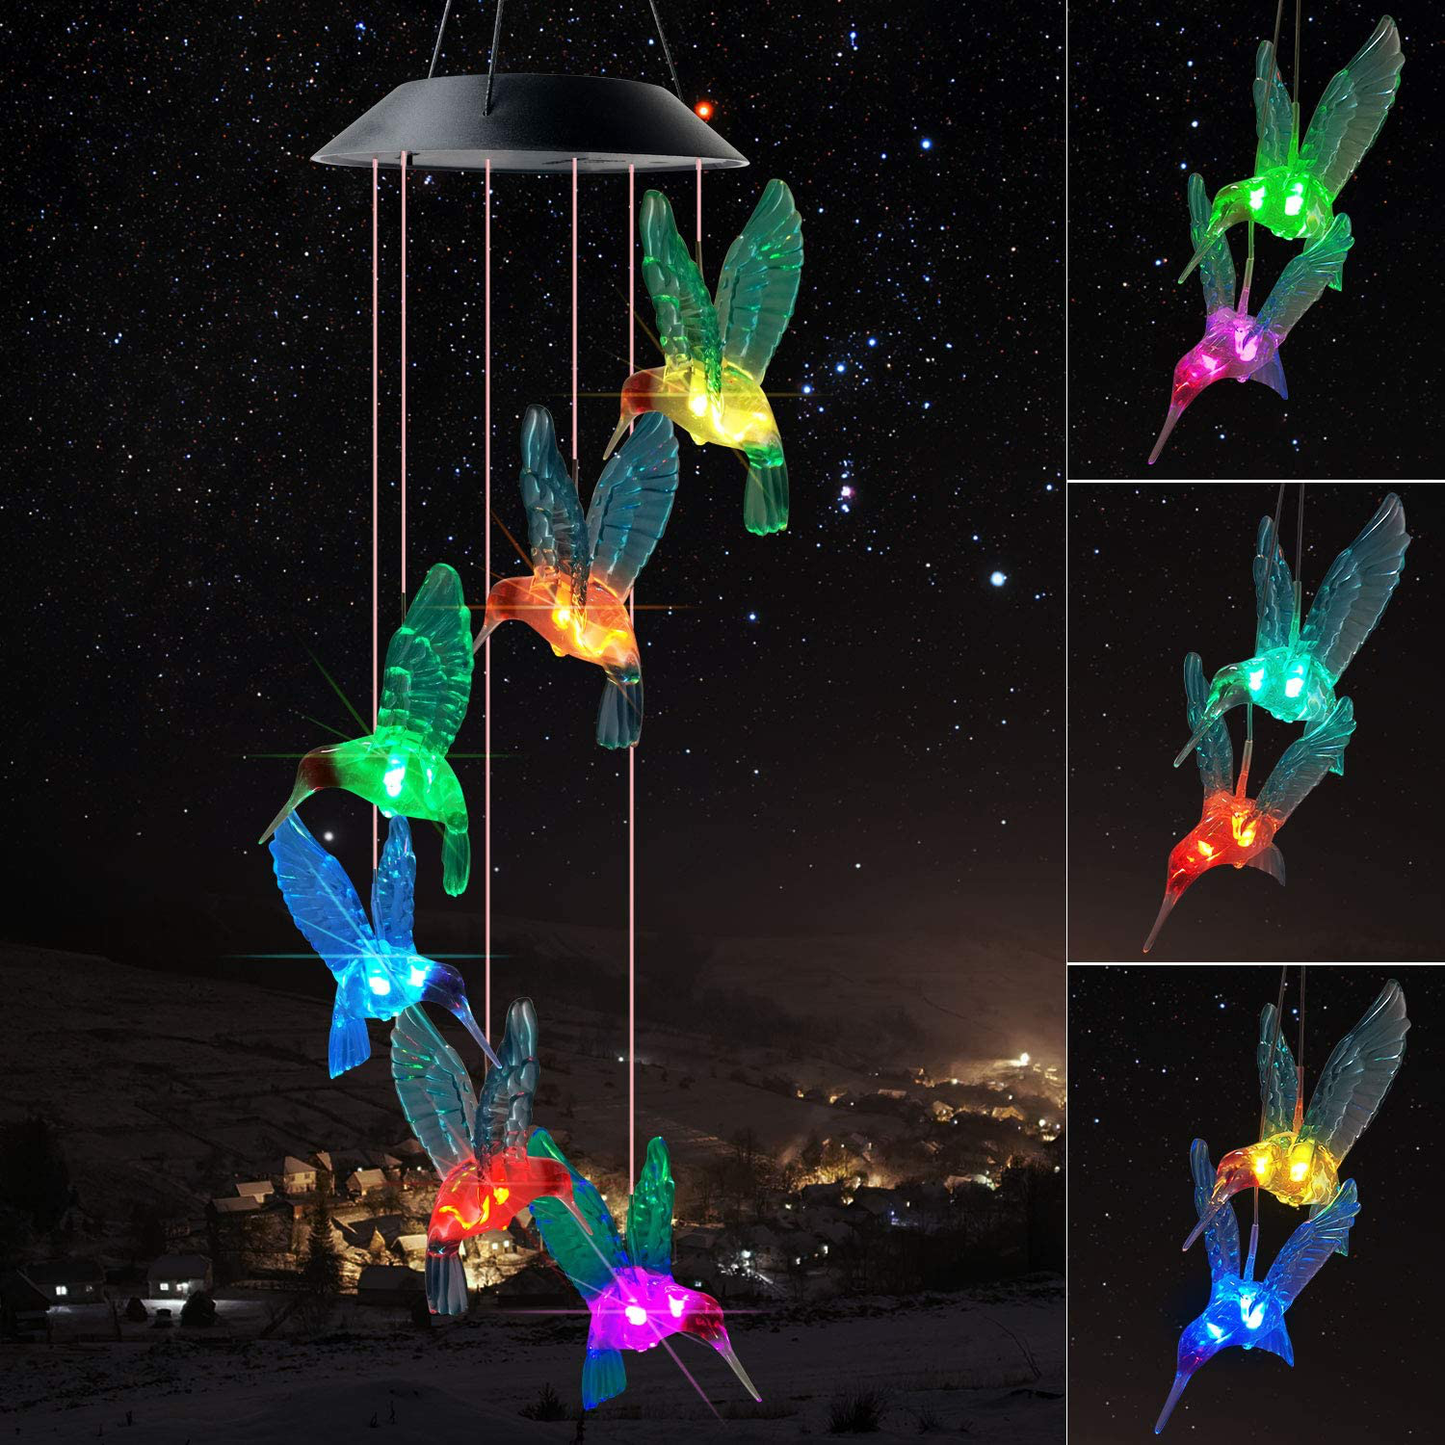 JOBOSI Wind Chimes, Hummingbird Wind Chimes Outdoor,Solar Wind Chimes, Gifts for Mom, Birthday Gifts for Women.